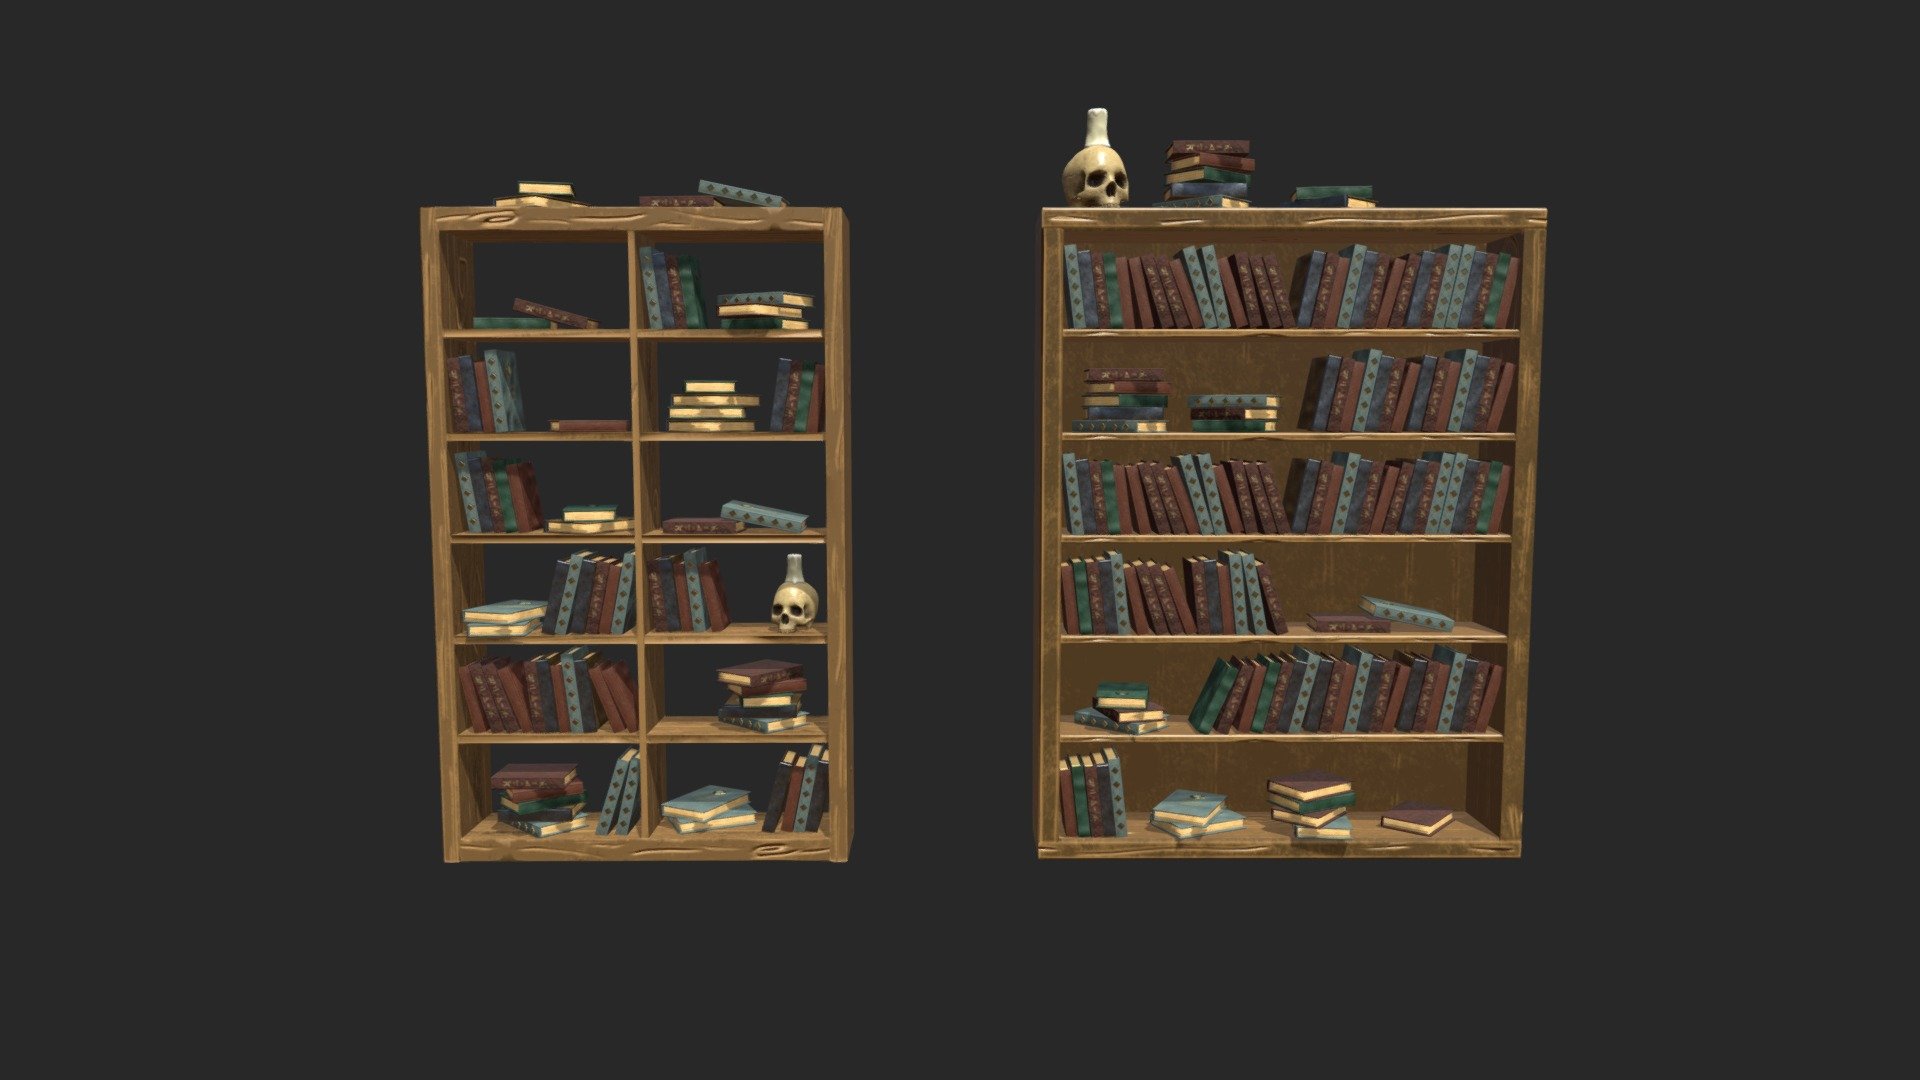 These low poly models are intended for use in any engine that supports PBR rendering, such as Unity, UnrealEngine, and others.

Technical details:

8 models




Texture size: 2048x2048

Textures for Unity

Textures for UnrealEngine4

Textures for PBR metal roughness

Polycount:




Bookcase 1: faces - 524, tris - 1048.

Bookcase 2: faces - 552, tris - 1104.

Book 1: faces - 396, tris - 772.

Book 2: faces - 276, tris - 552.

Book 3: faces - 300, tris - 600.

Book 4: faces - 380, tris - 760.

Book 5: faces - 326, tris - 652.

Skull: faces - 3142, tris - 6251.

If you have any questions - write to us, we will be happy to answer!

Please feel free to download it and leave your comments and likes :) - Stylized alchemist shelves with books and skull - Buy Royalty Free 3D model by Mnostva 3d model